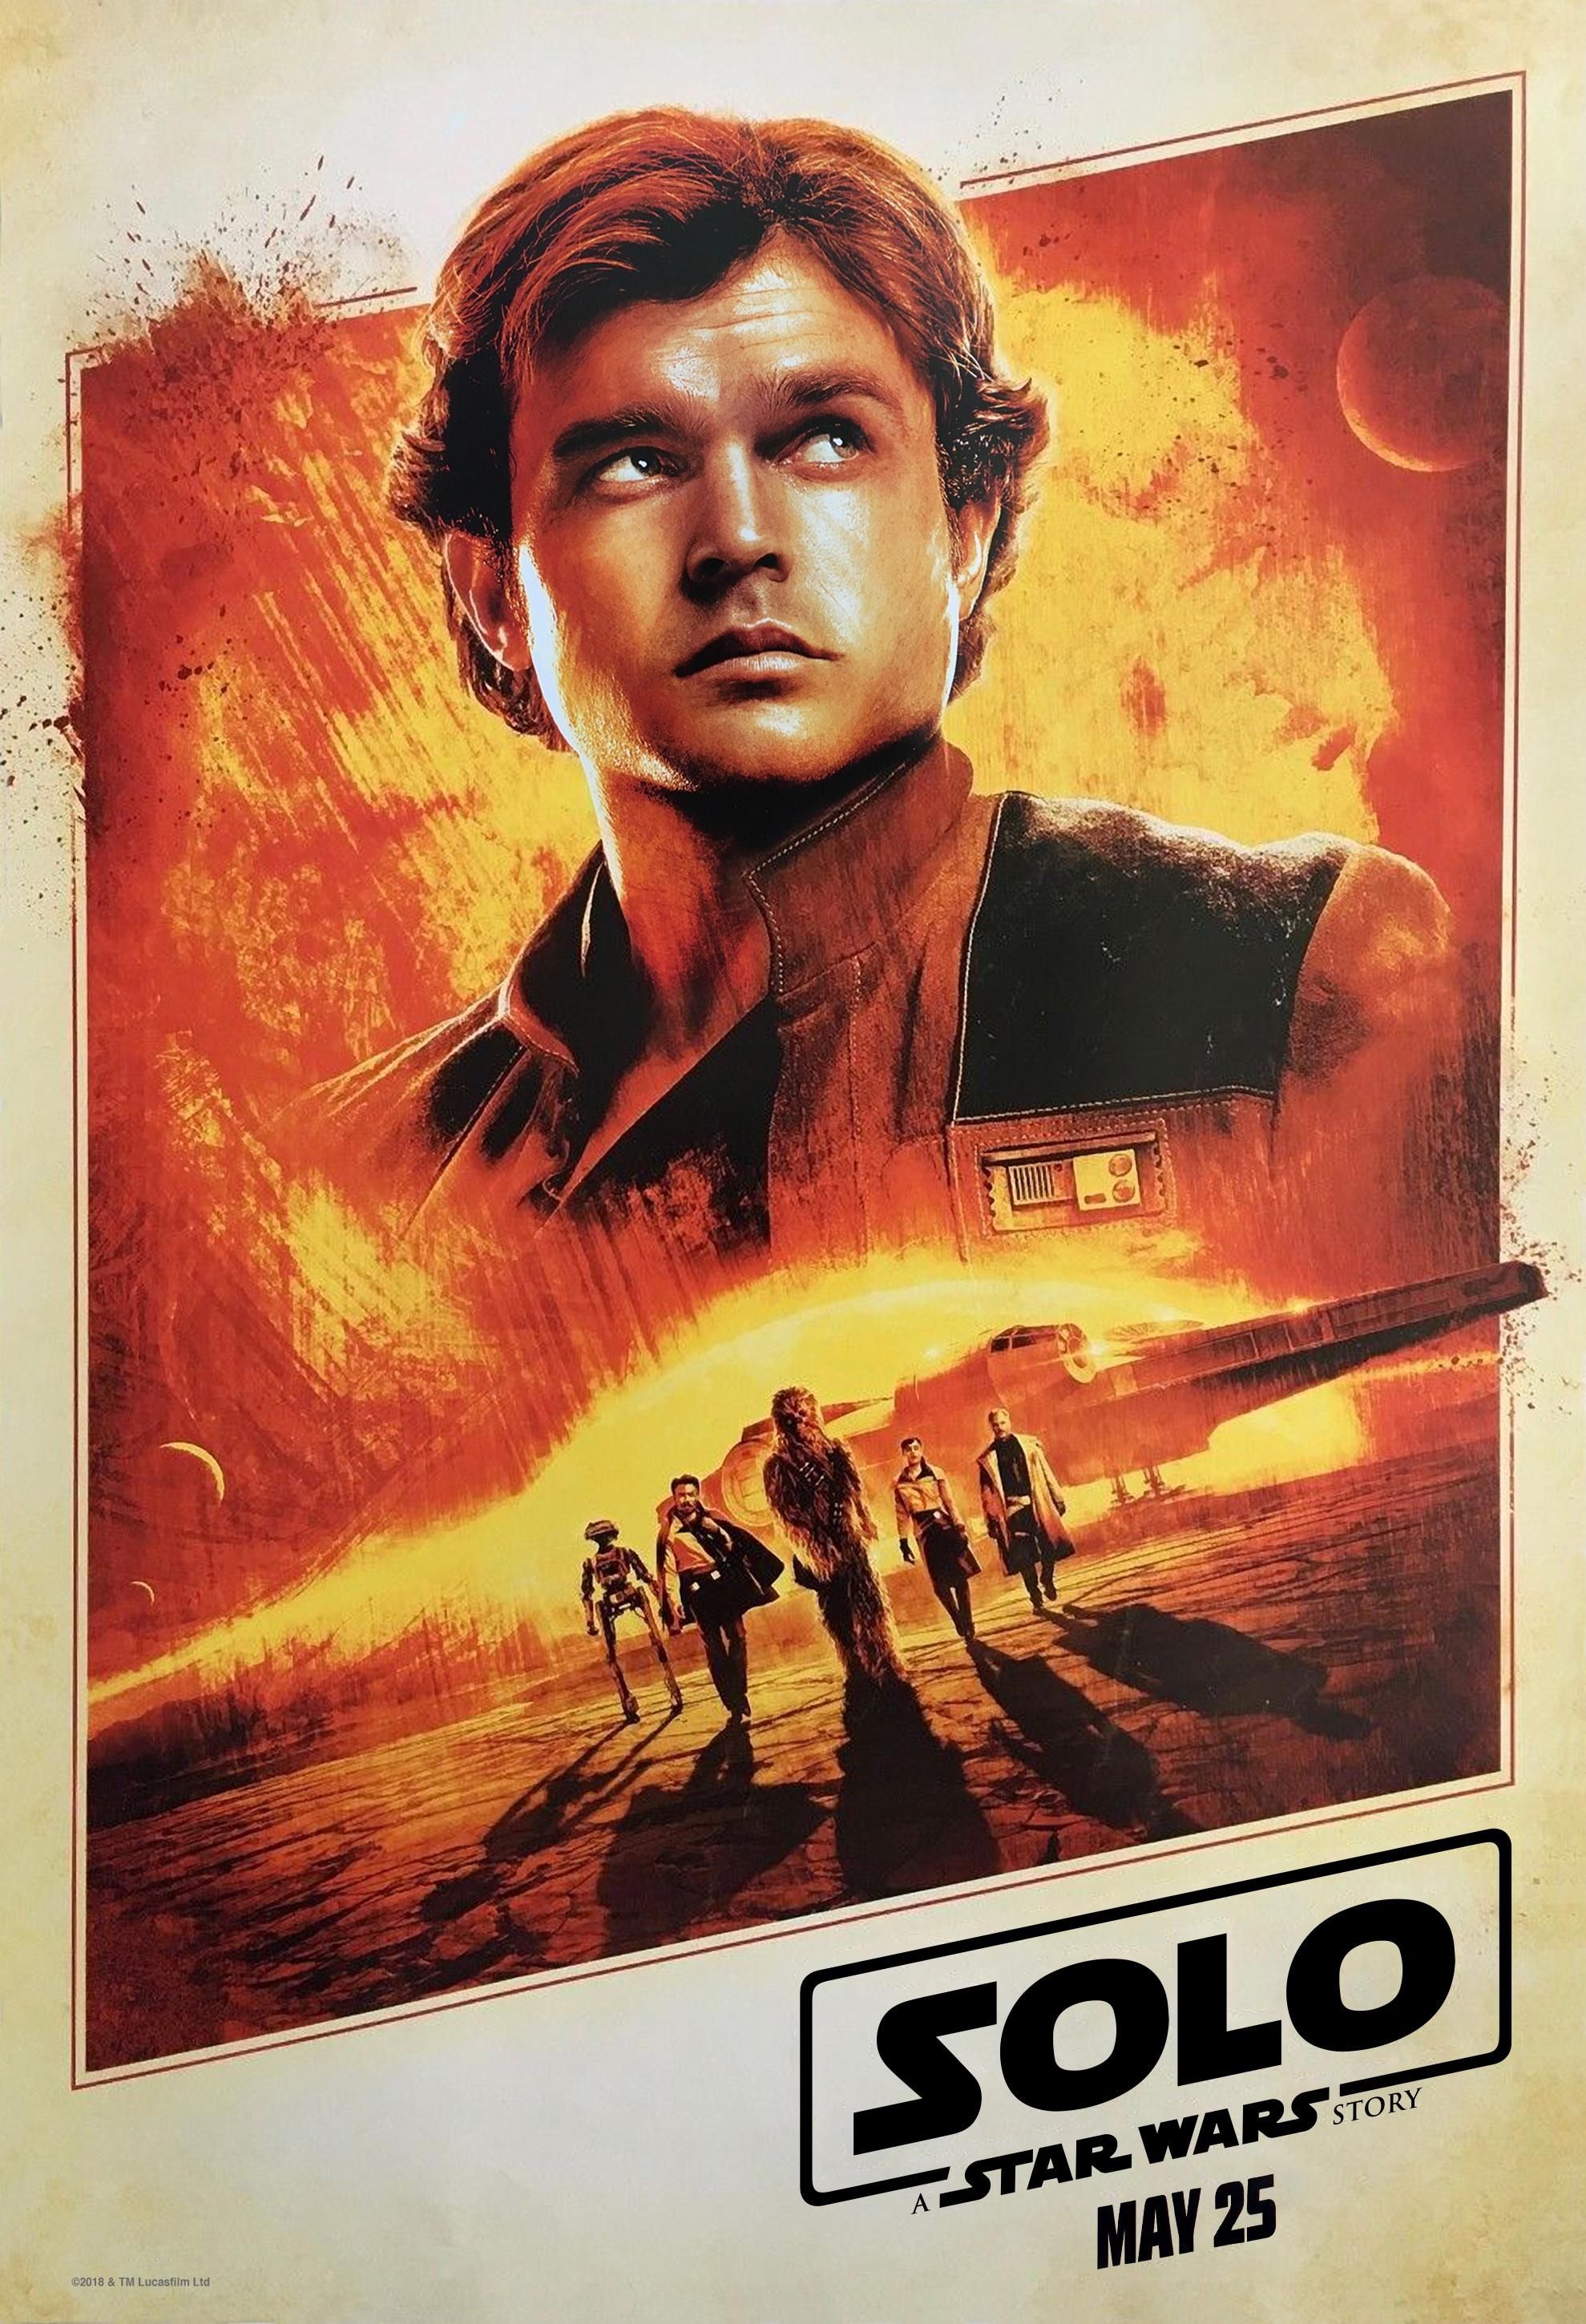 "SOLO a Star Wars Story May 25" Tan background, red-orange rhombus frame, man in pilot's jacket looking dramatically off into the distance, three planets, spaceship, robot, wookie, and three men walking toward viewer